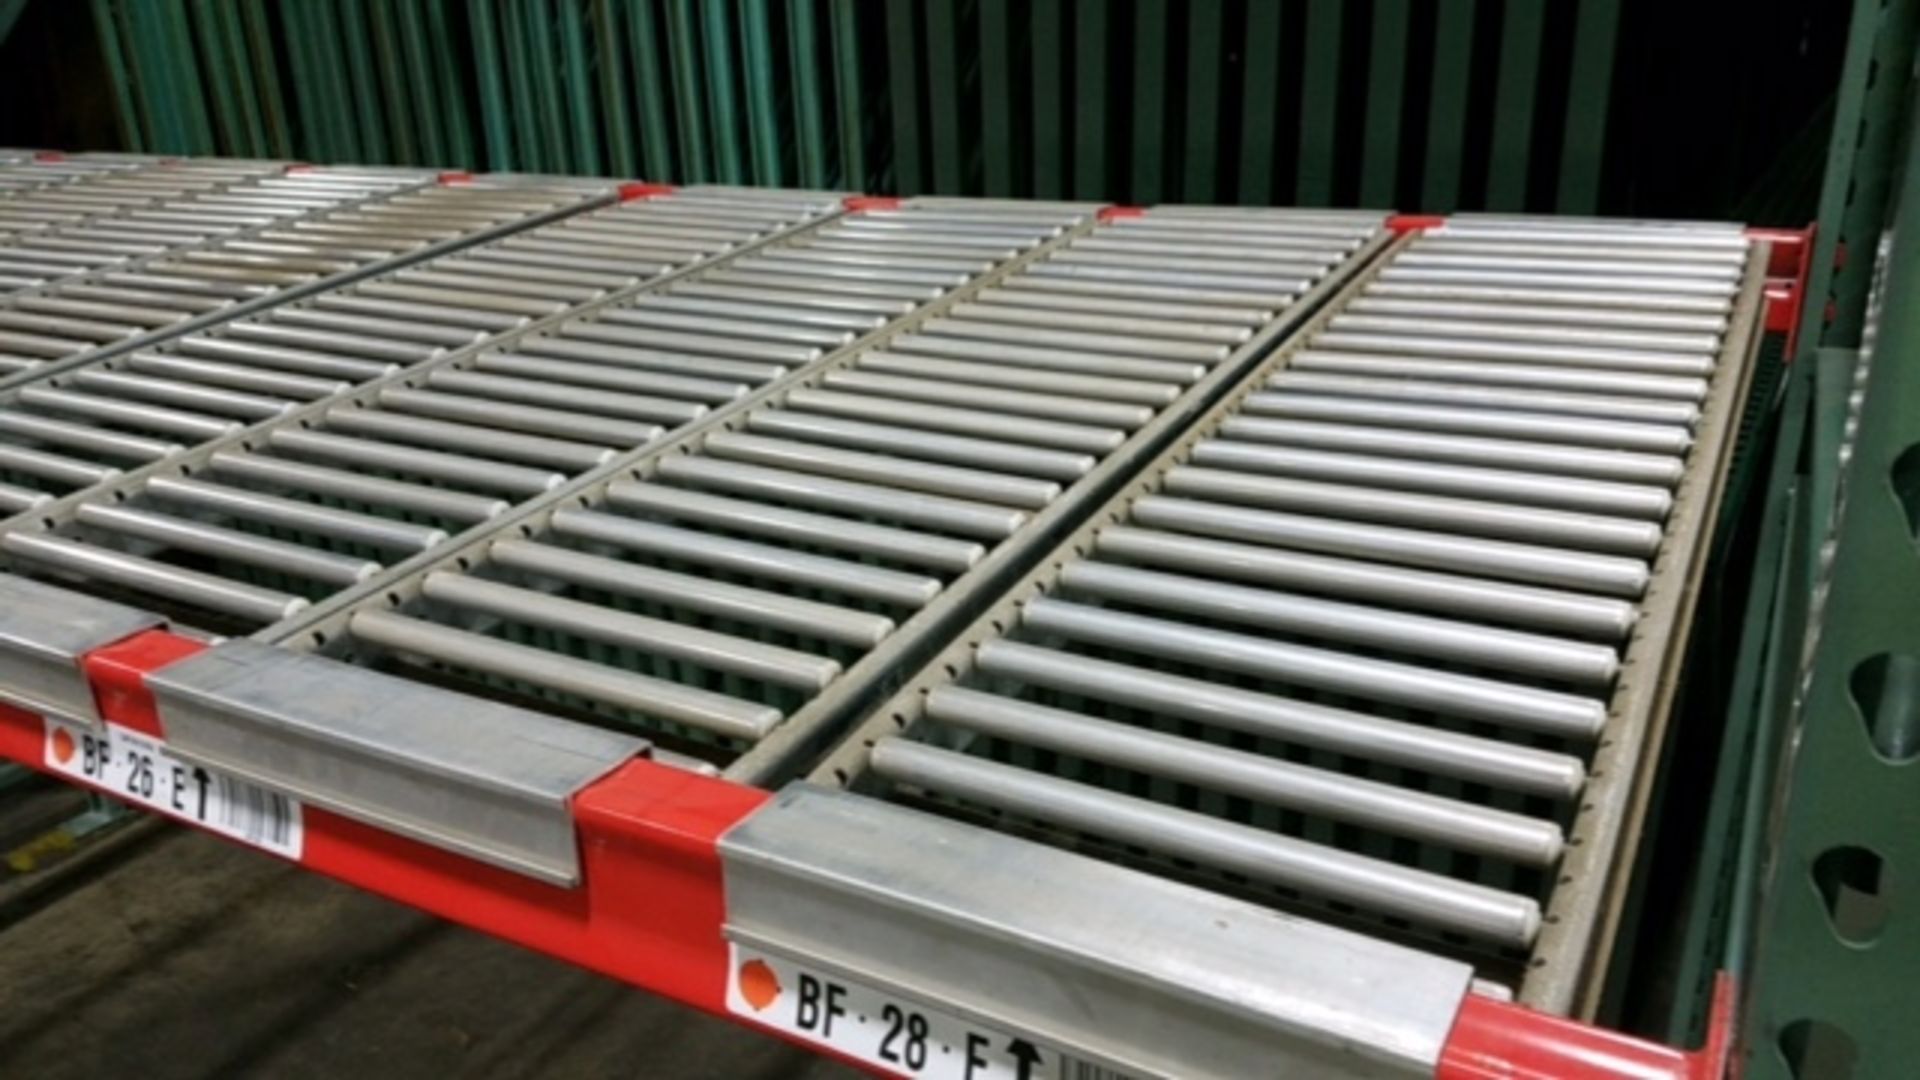 SPAN TRACK ROLLER TRACKS 42.5"L MADE FOR 48" DEEP PALLET RACKING (X18) - Image 3 of 5